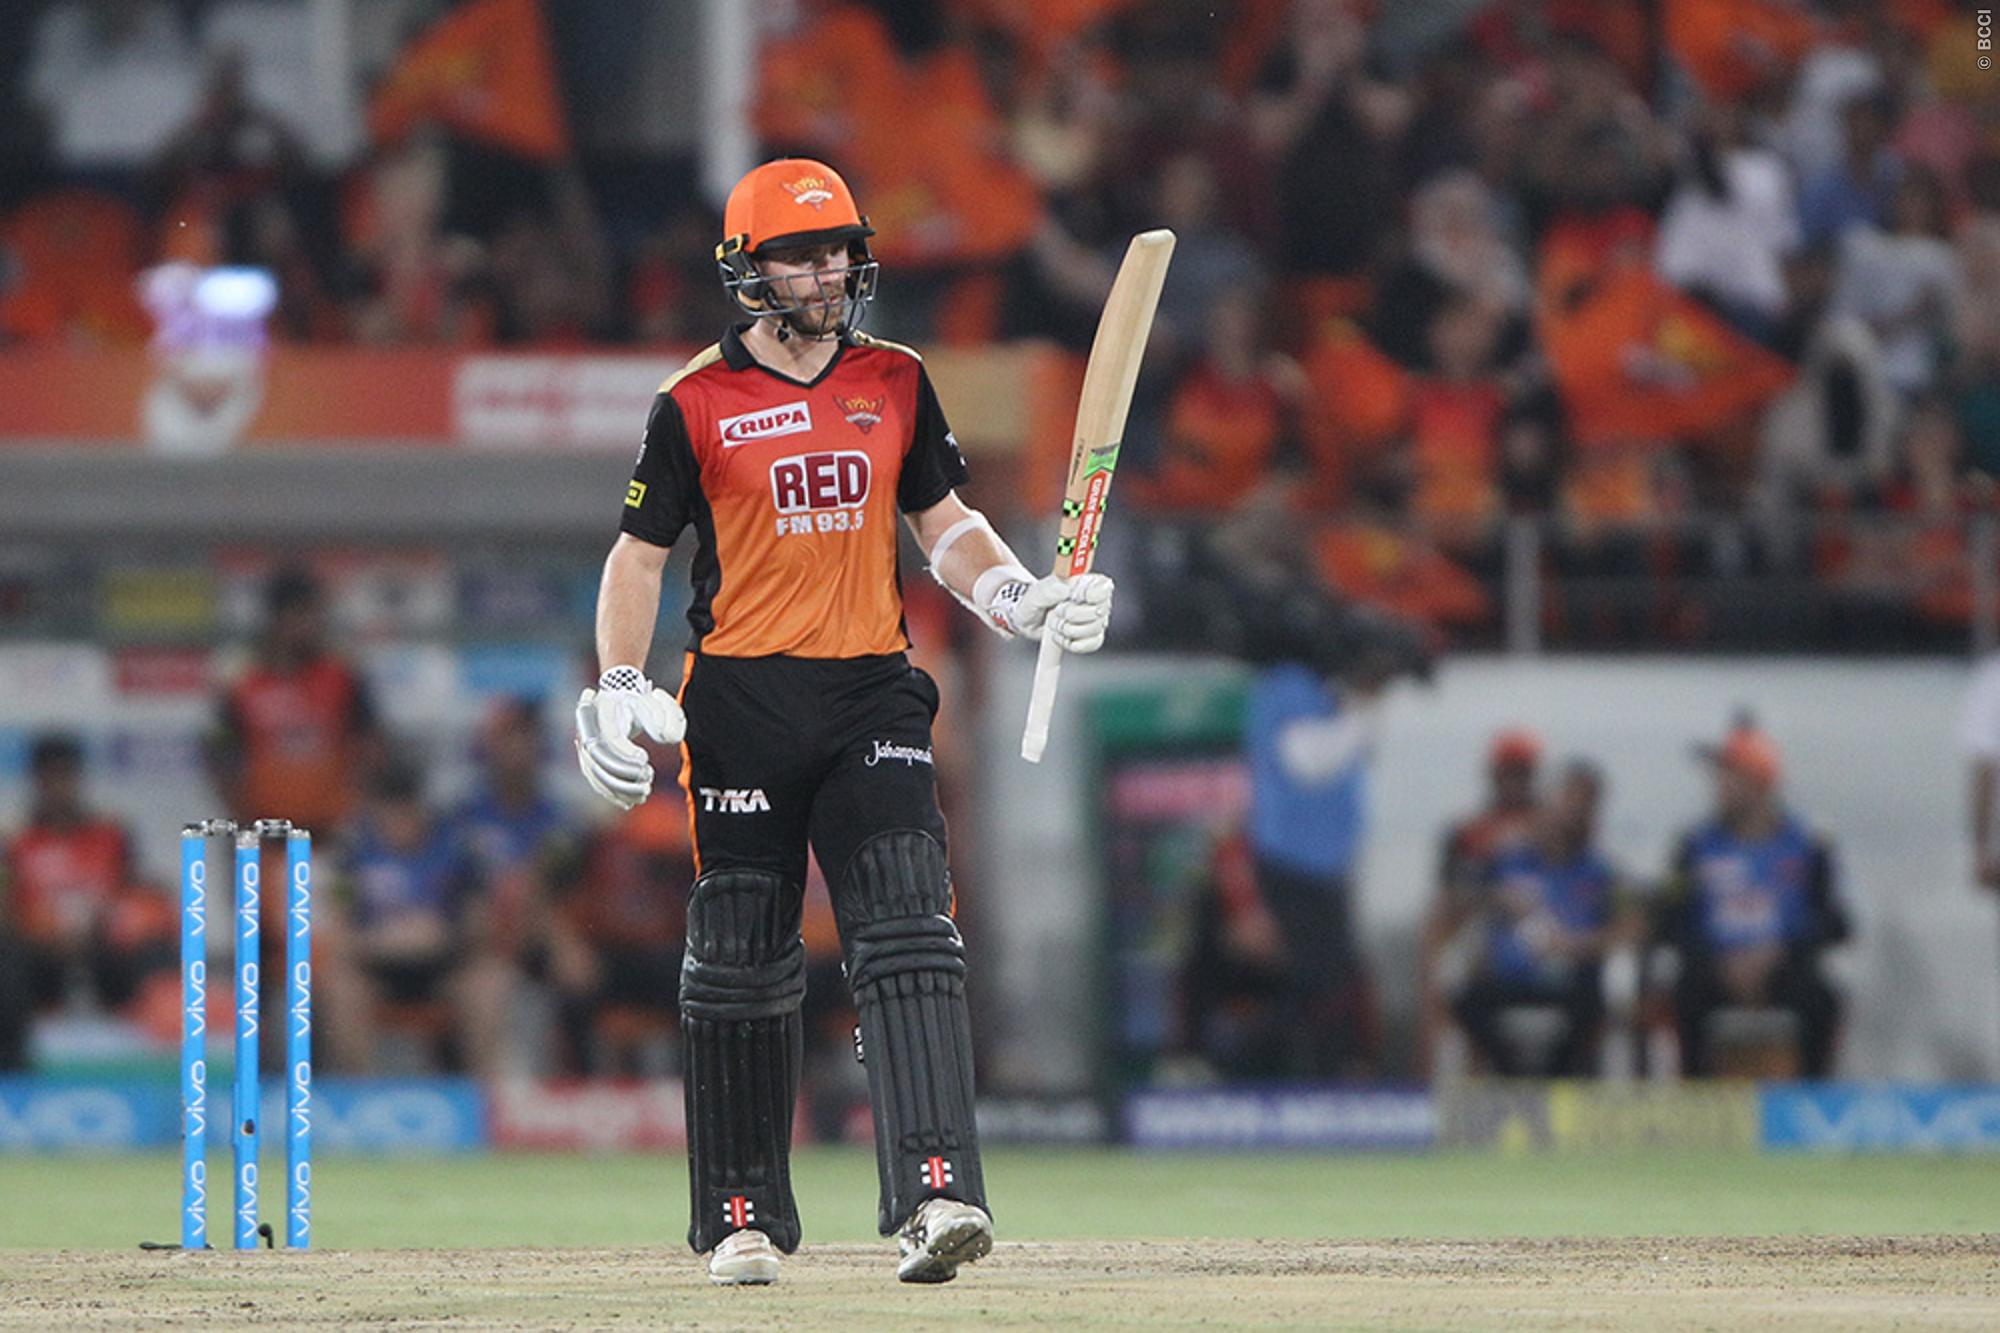 Start your Sunday off in sublime fashion by placing these three Bets from Sunrisers vs Rajasthan